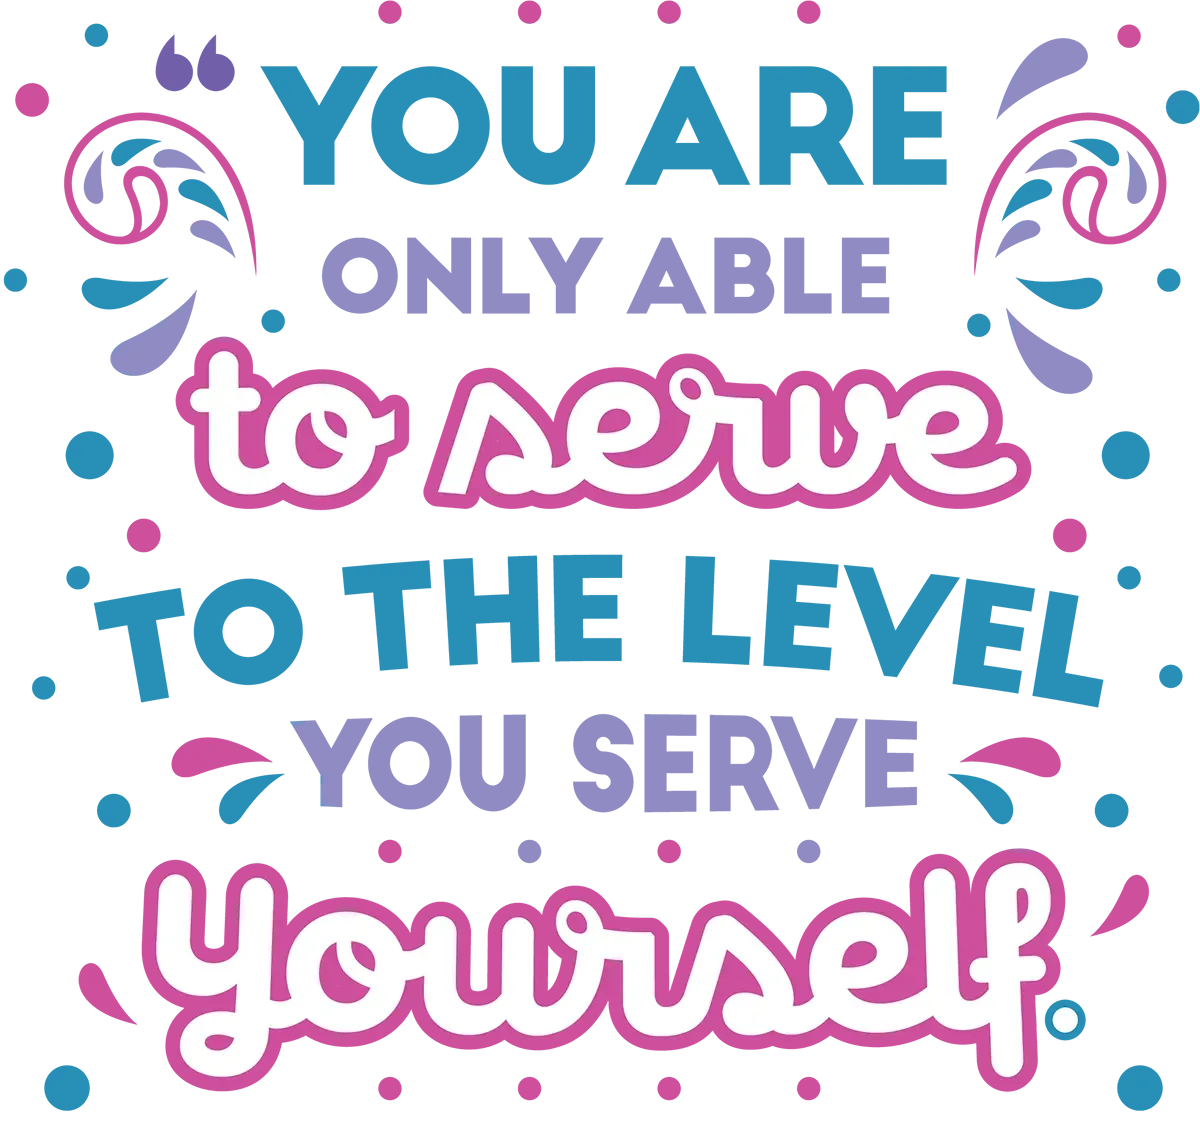 You are only able to serve to the level you serve yourself.